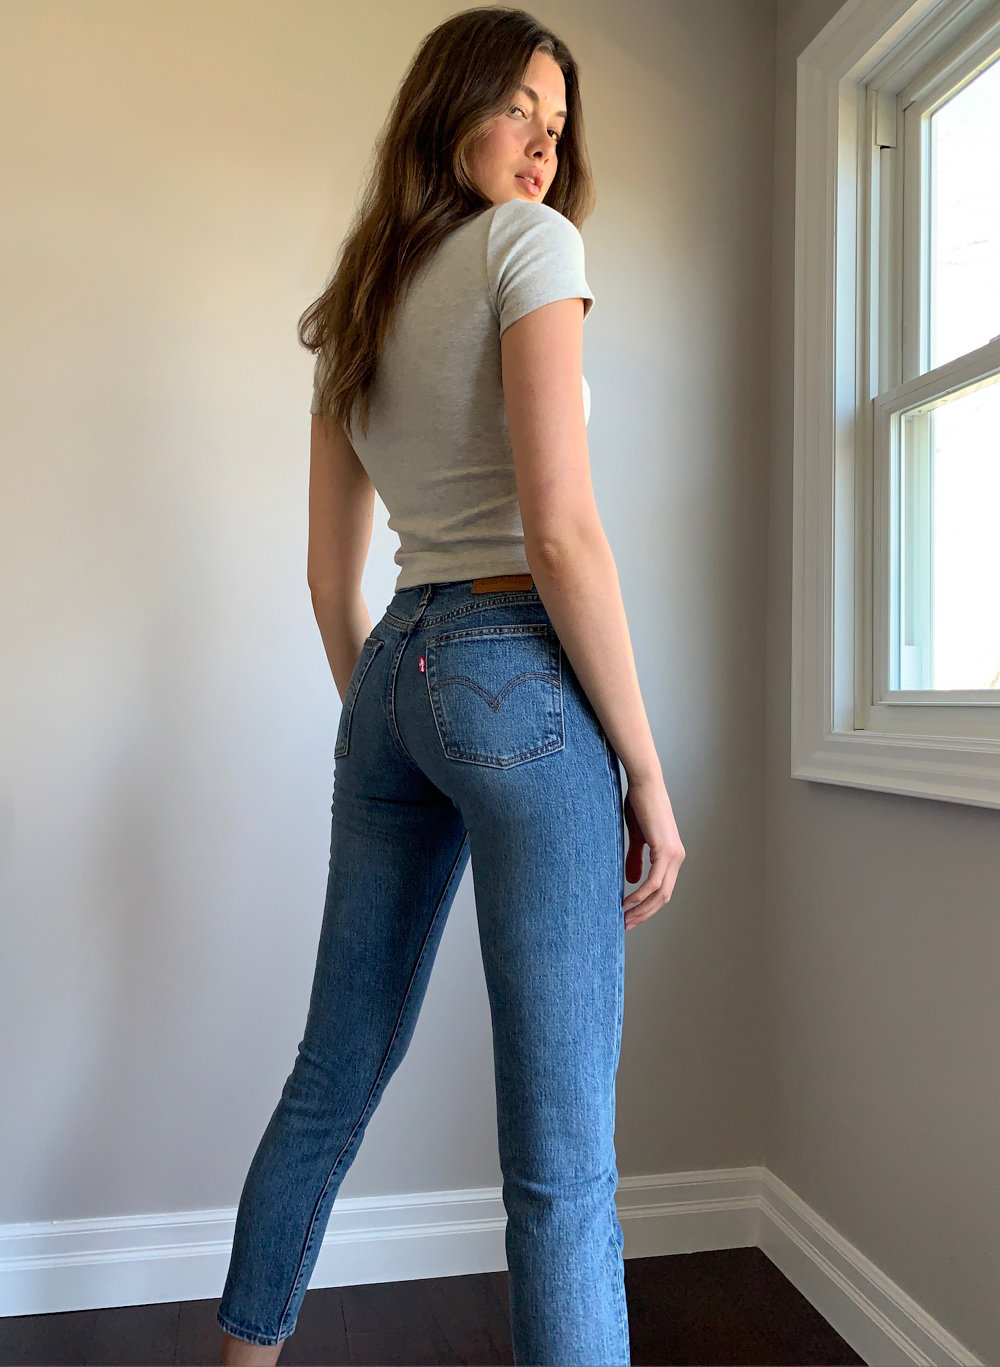 levis wedgie jeans that girl